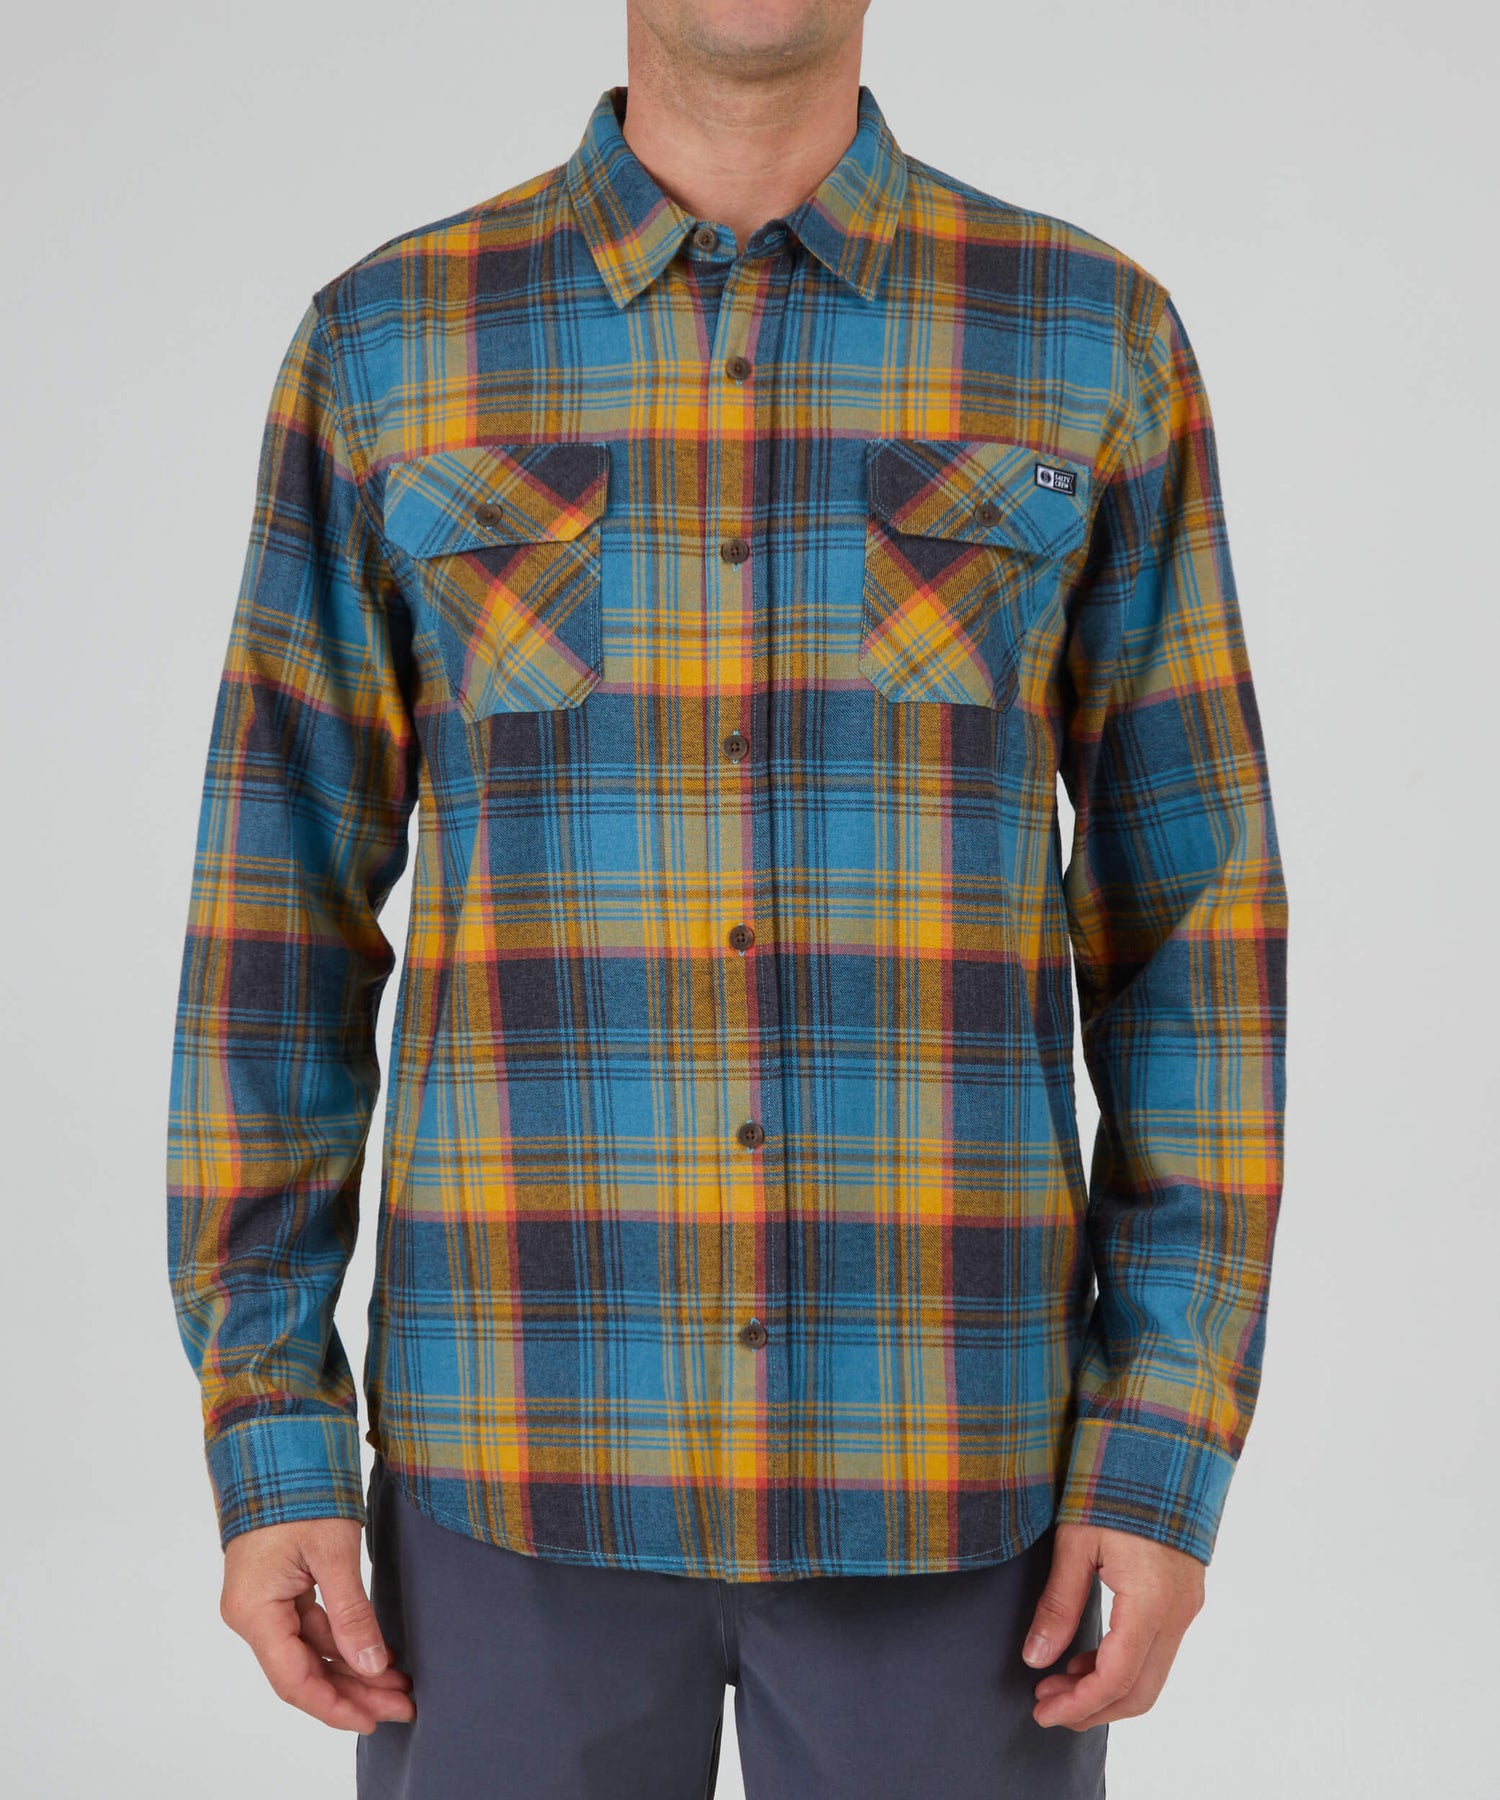 Salty crew WOVEN SHIRTS Frothing Flannel - Slate/Gold in Slate/Gold